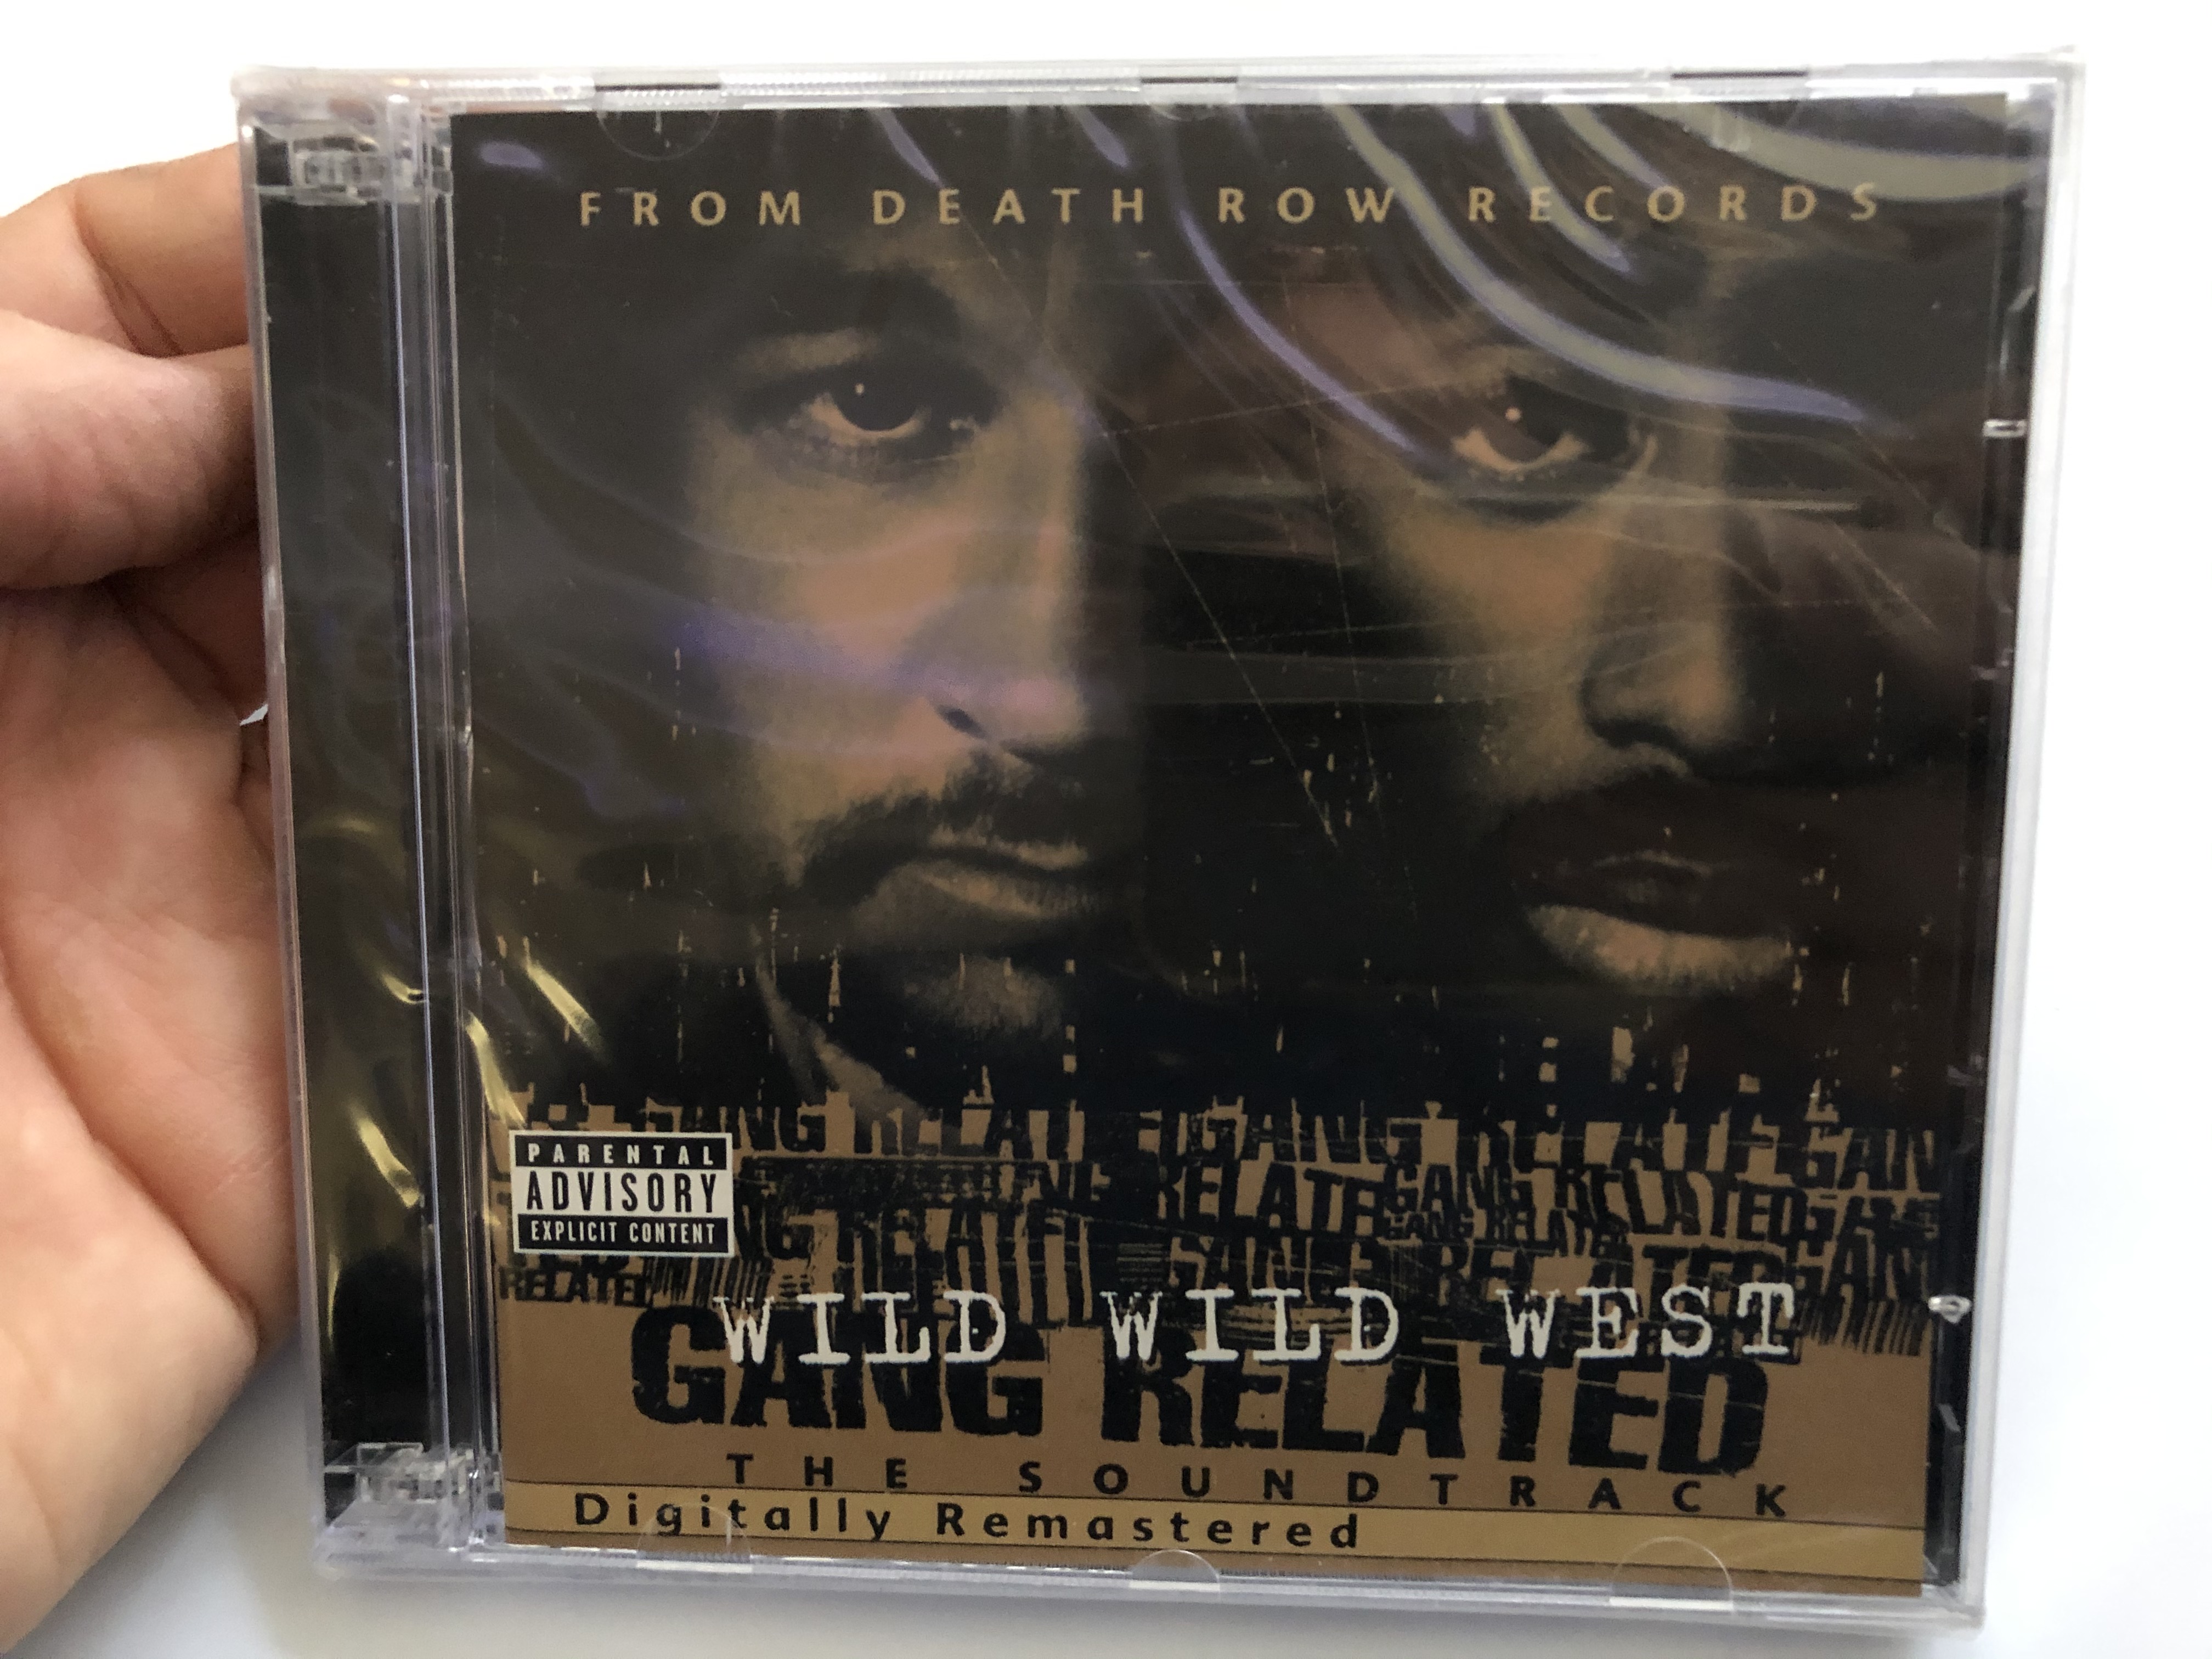 wild-wild-west-gang-related-the-soundtrack-from-death-records-digitally-remastered-death-row-records-2x-audio-cd-2001-pdr2003-1-.jpg